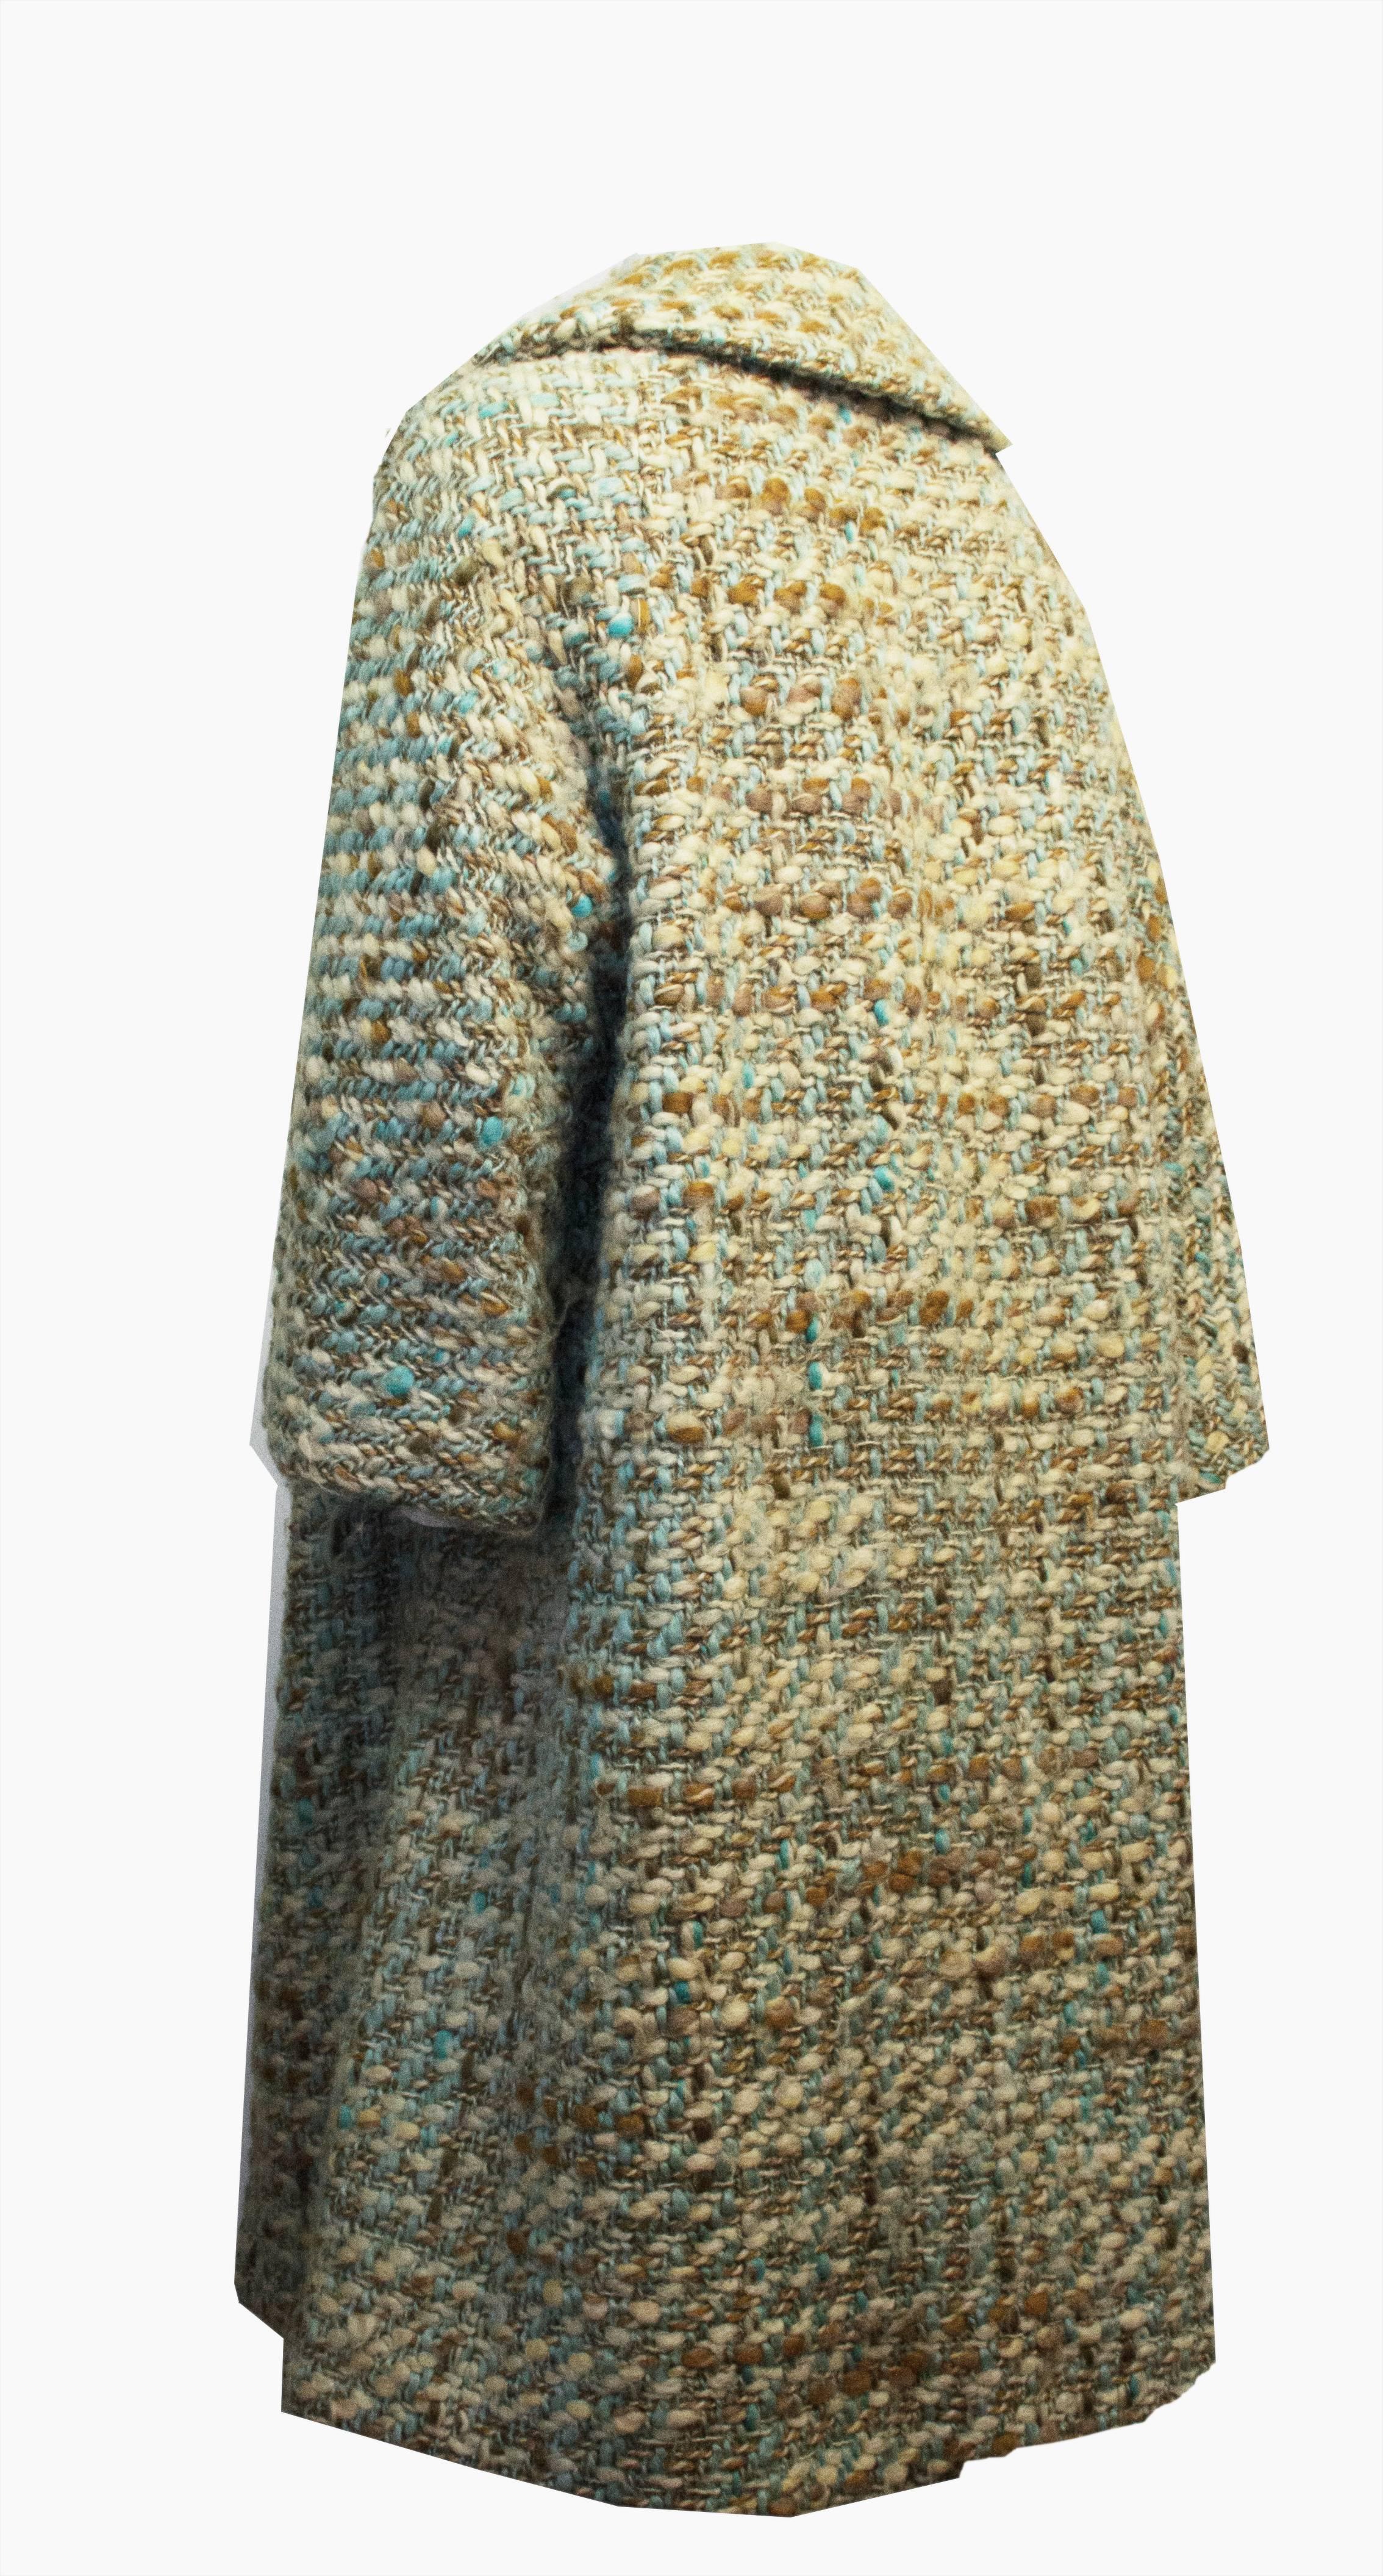 1960s Lilli Ann loose-weave tweed coat. Two front welt pockets. Notched collar. No front closure. Blue satin lining. Raglan 2/3 glove sleeve. 

16